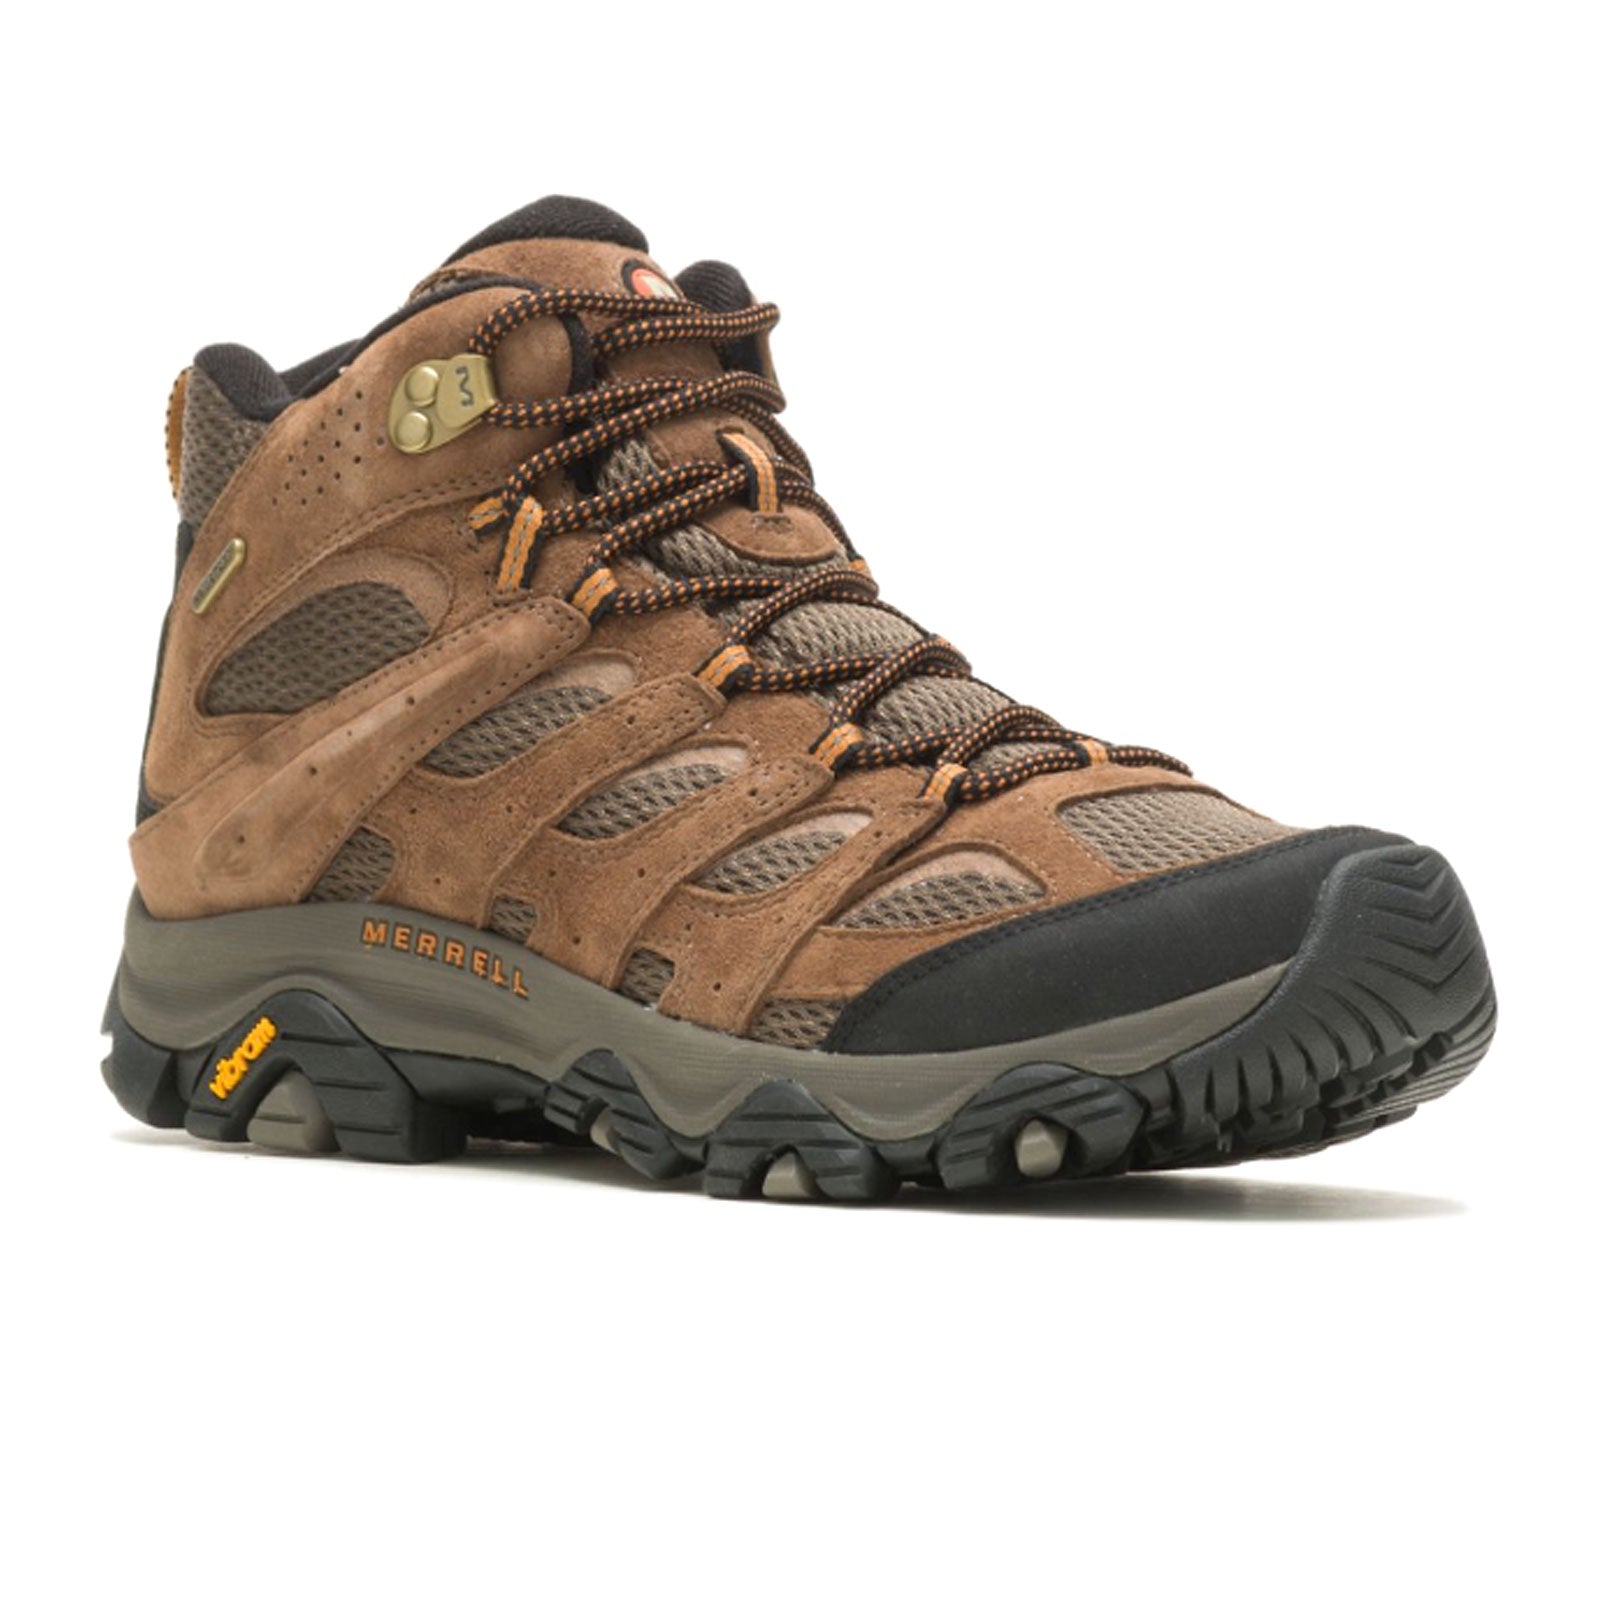 Merrell Shoes, Boots & Sandals - The Heel Fitters